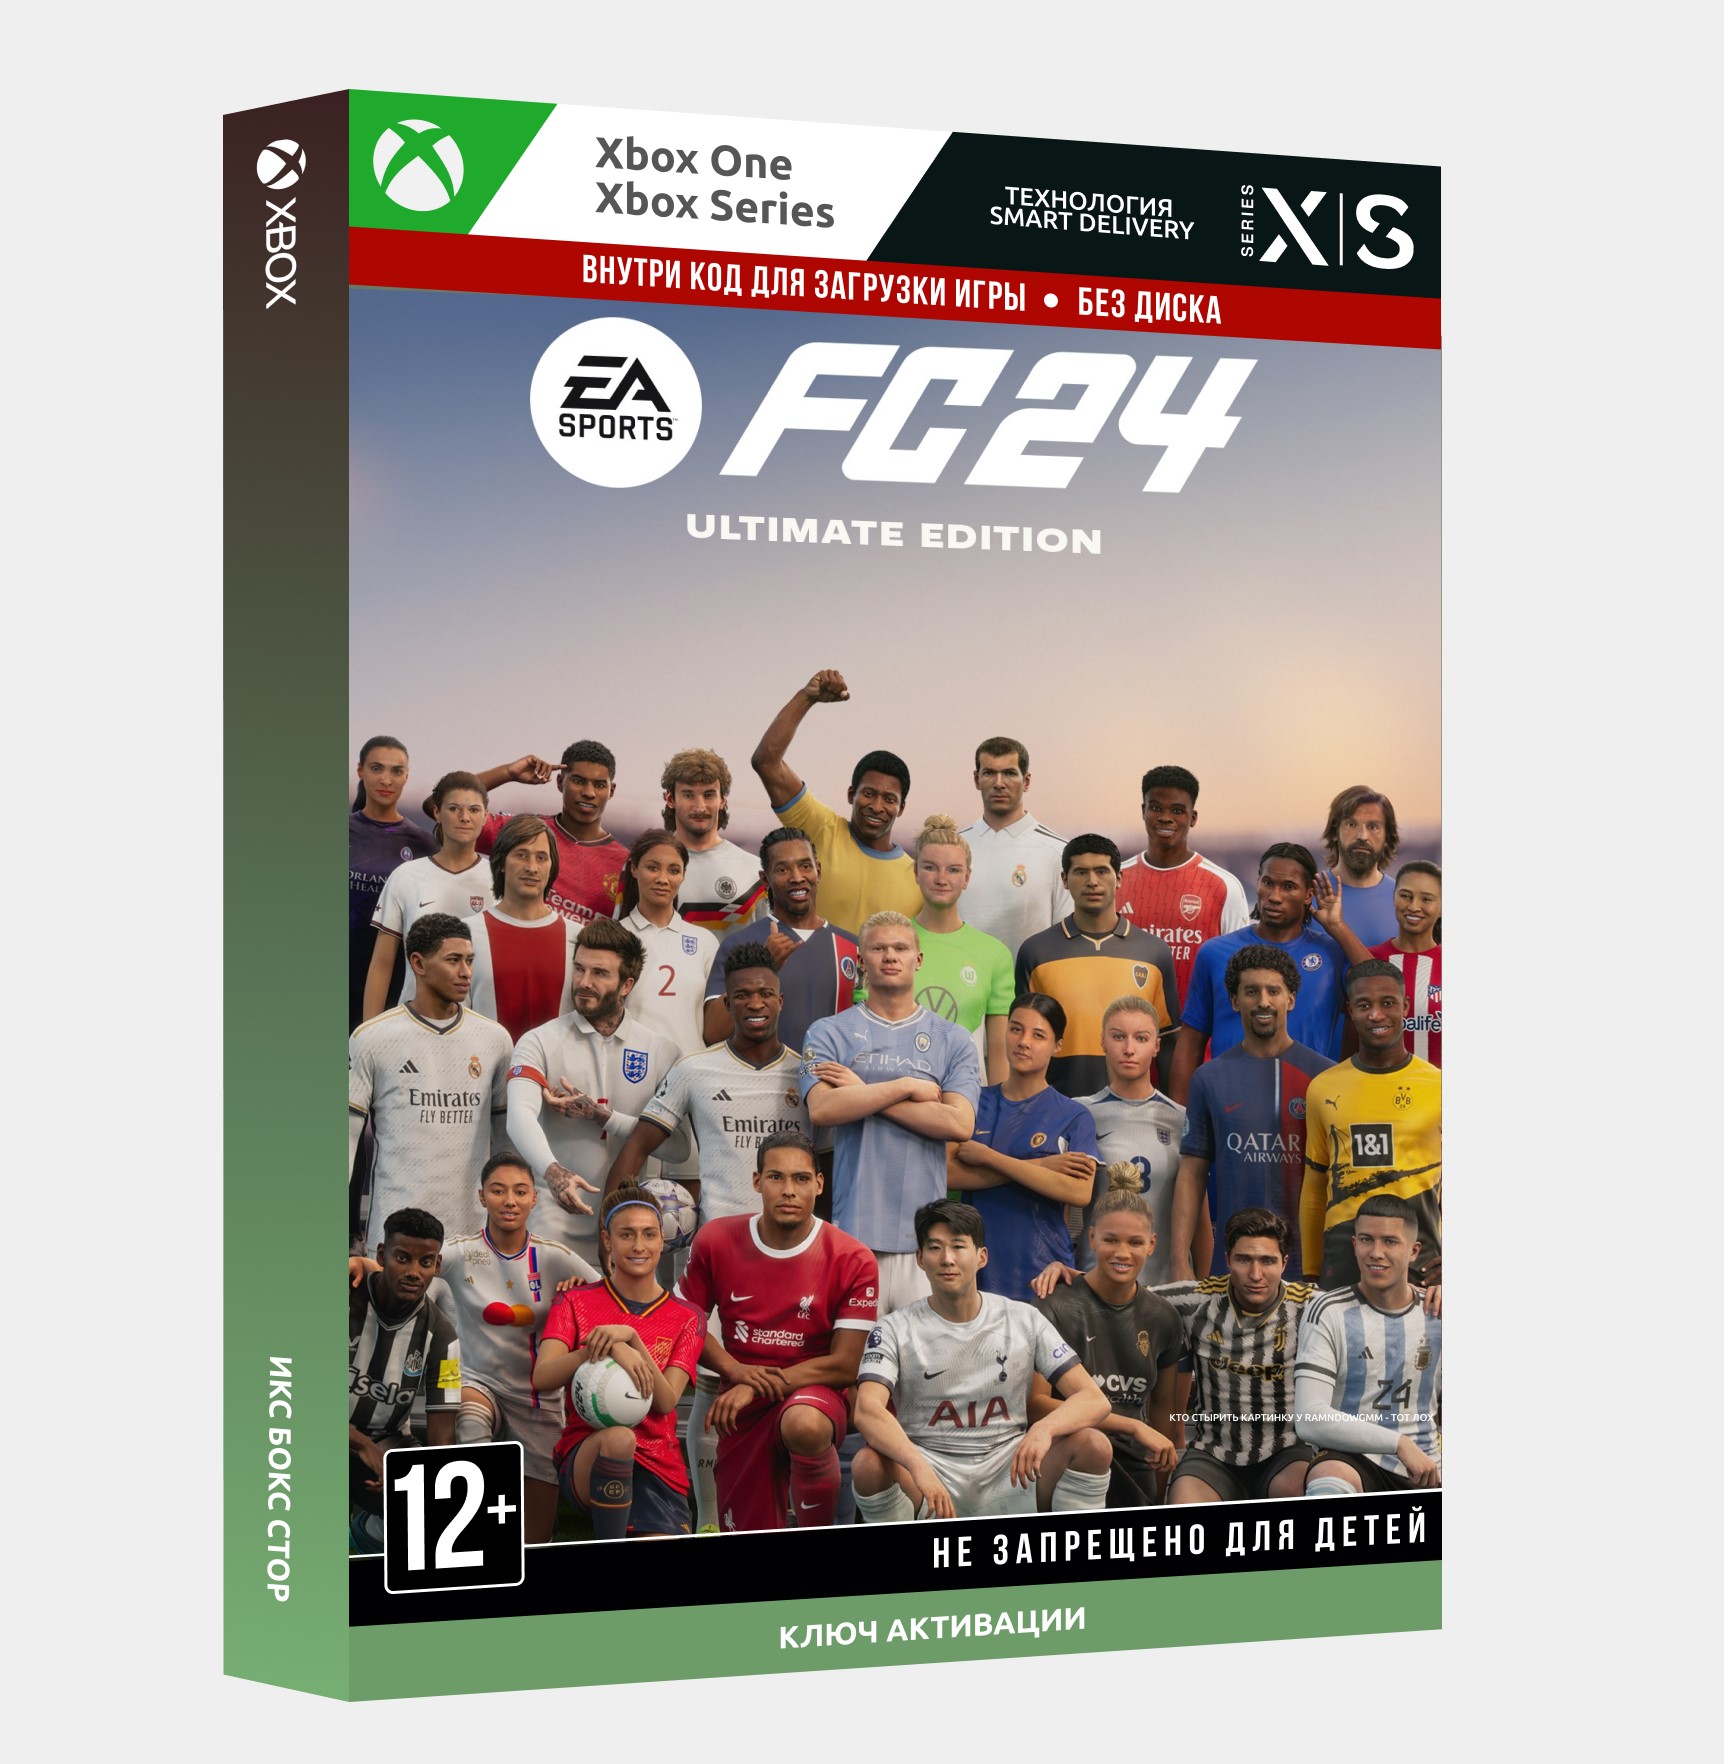 EA FC 24 Ultimate Edition диск. FC 24 Ultimate Edition.